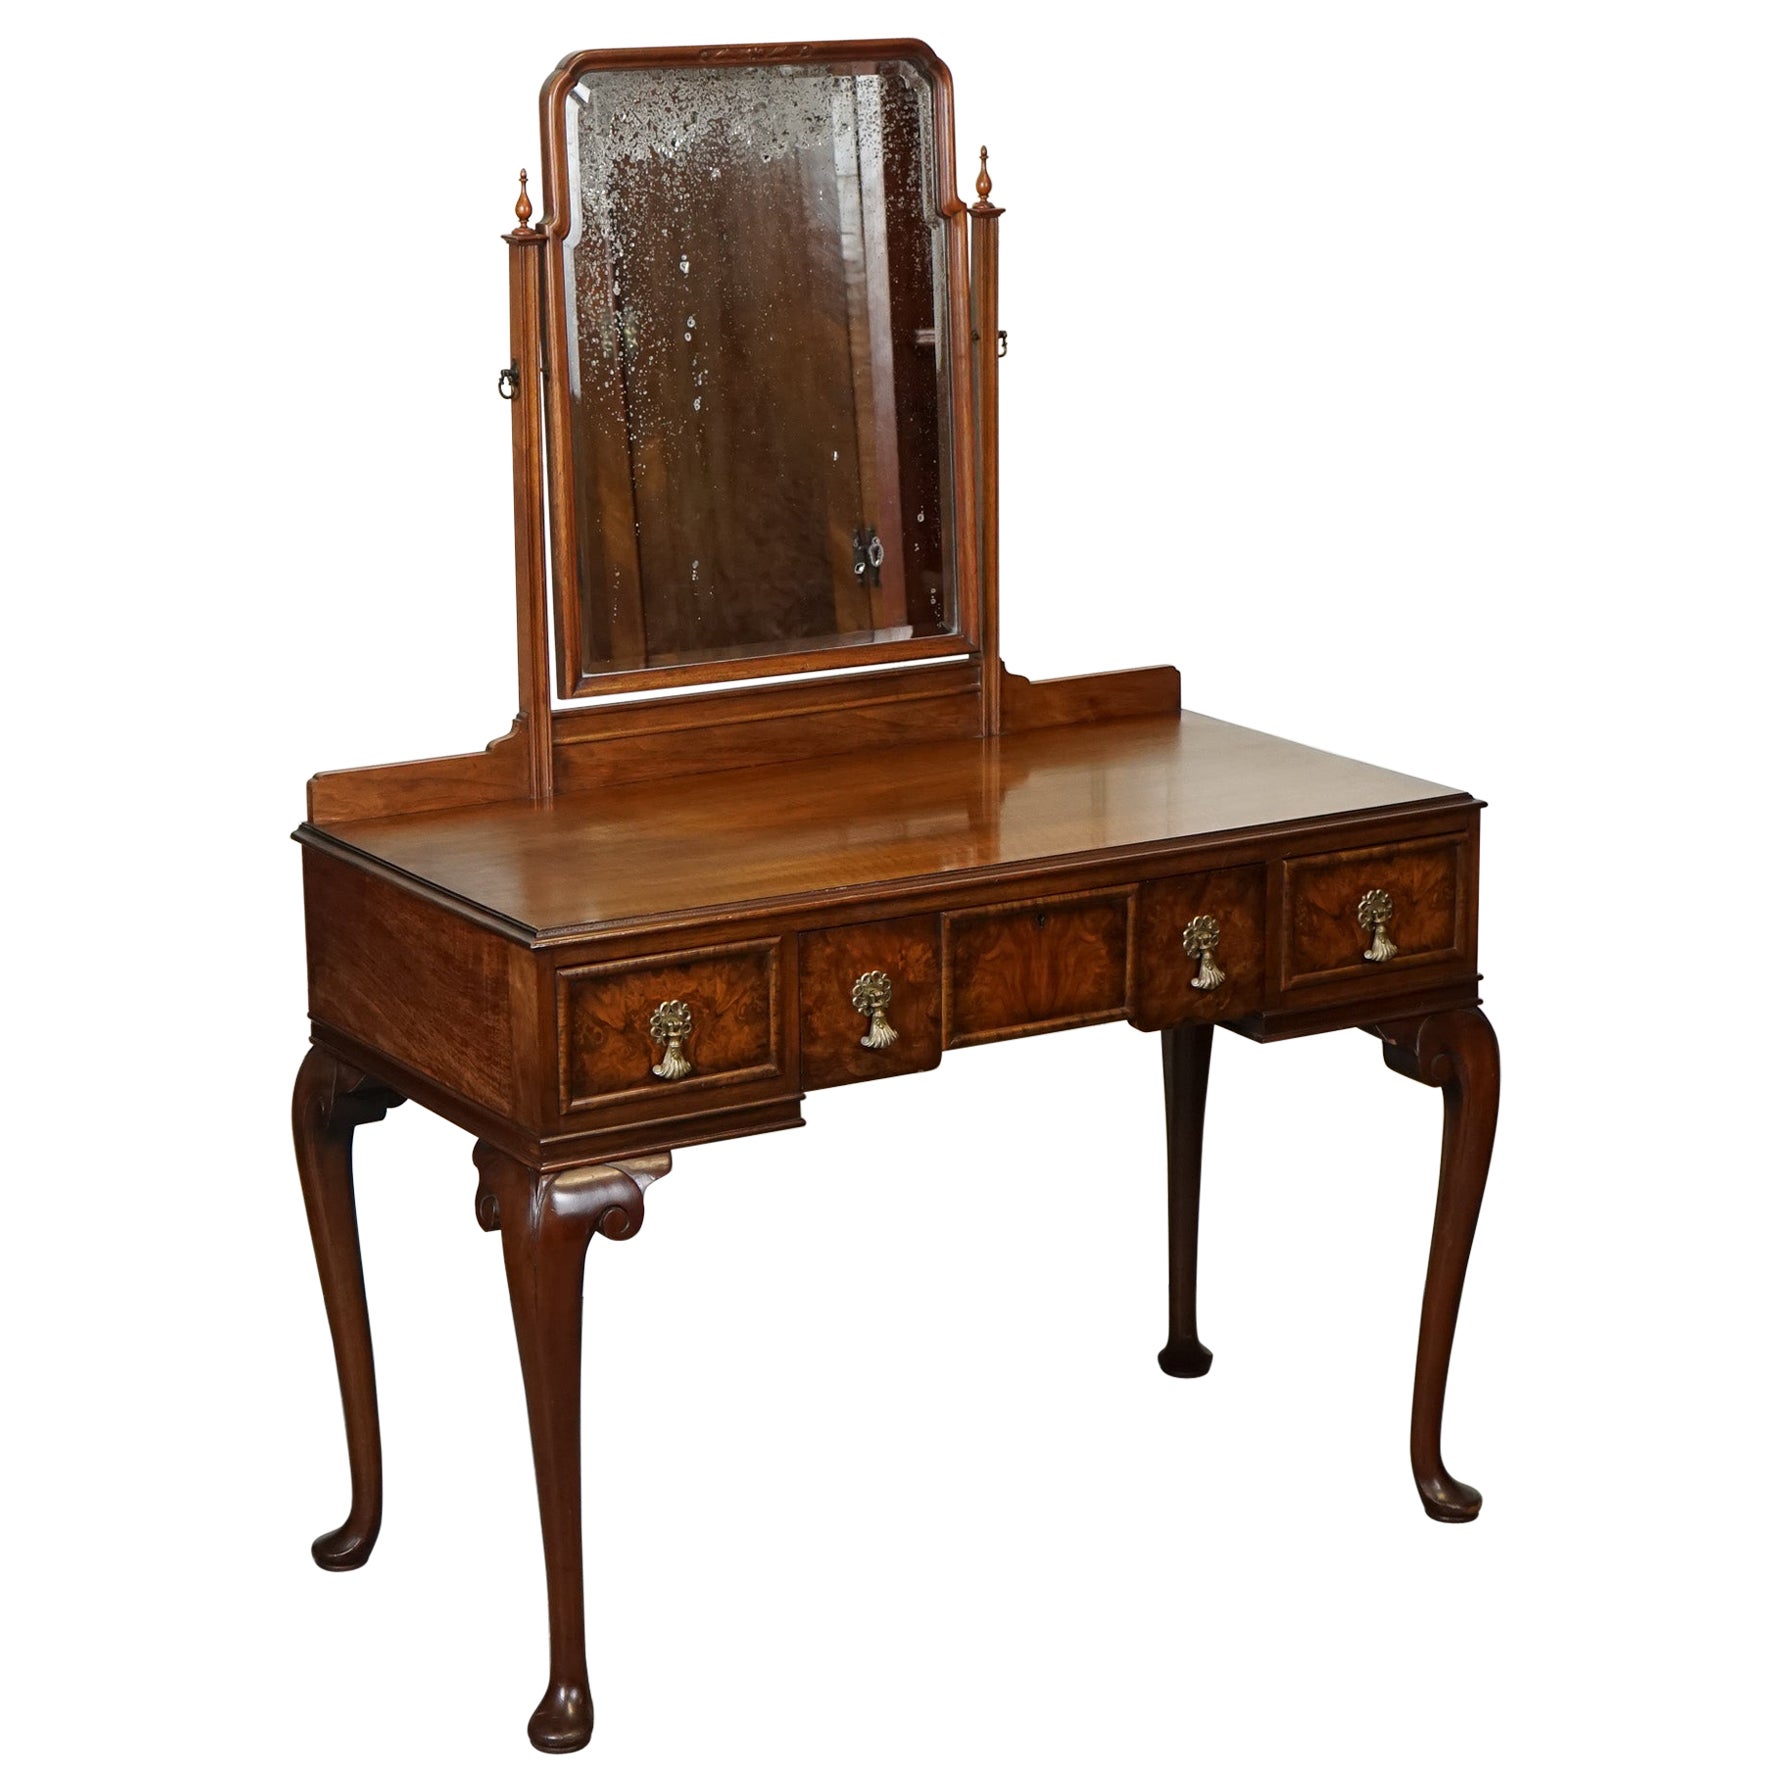 How do I identify my Gillows furniture?